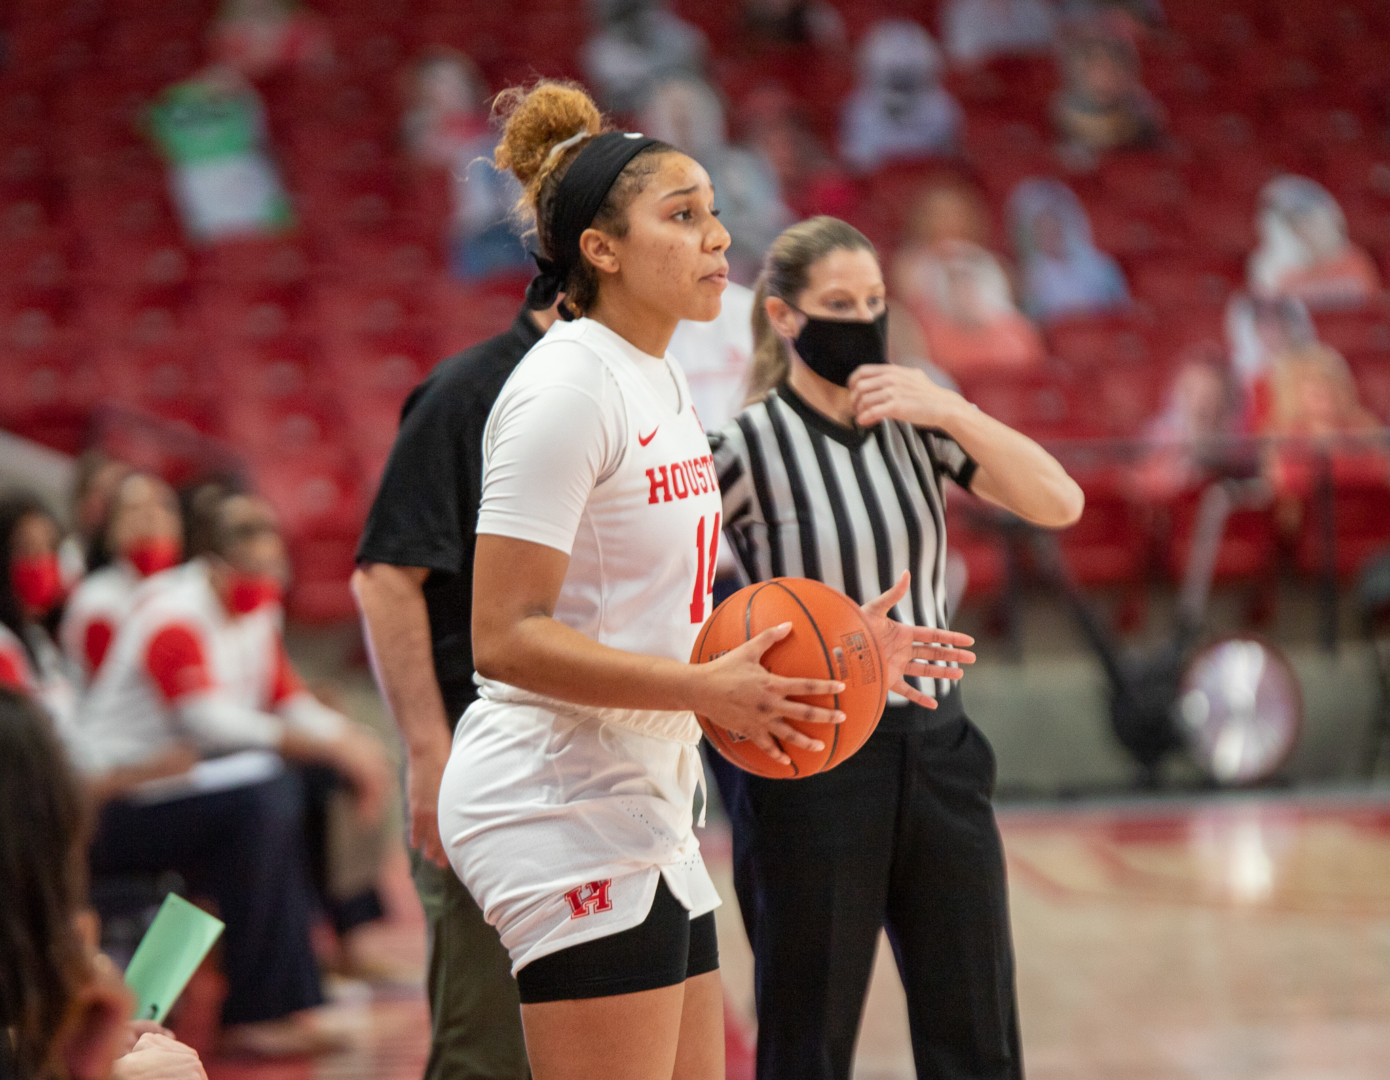 Laila Blair capped off her strong freshman season with a team-high 12 points to lead UH women's basketball over Arizona State | Andy Yanez/The Cougar